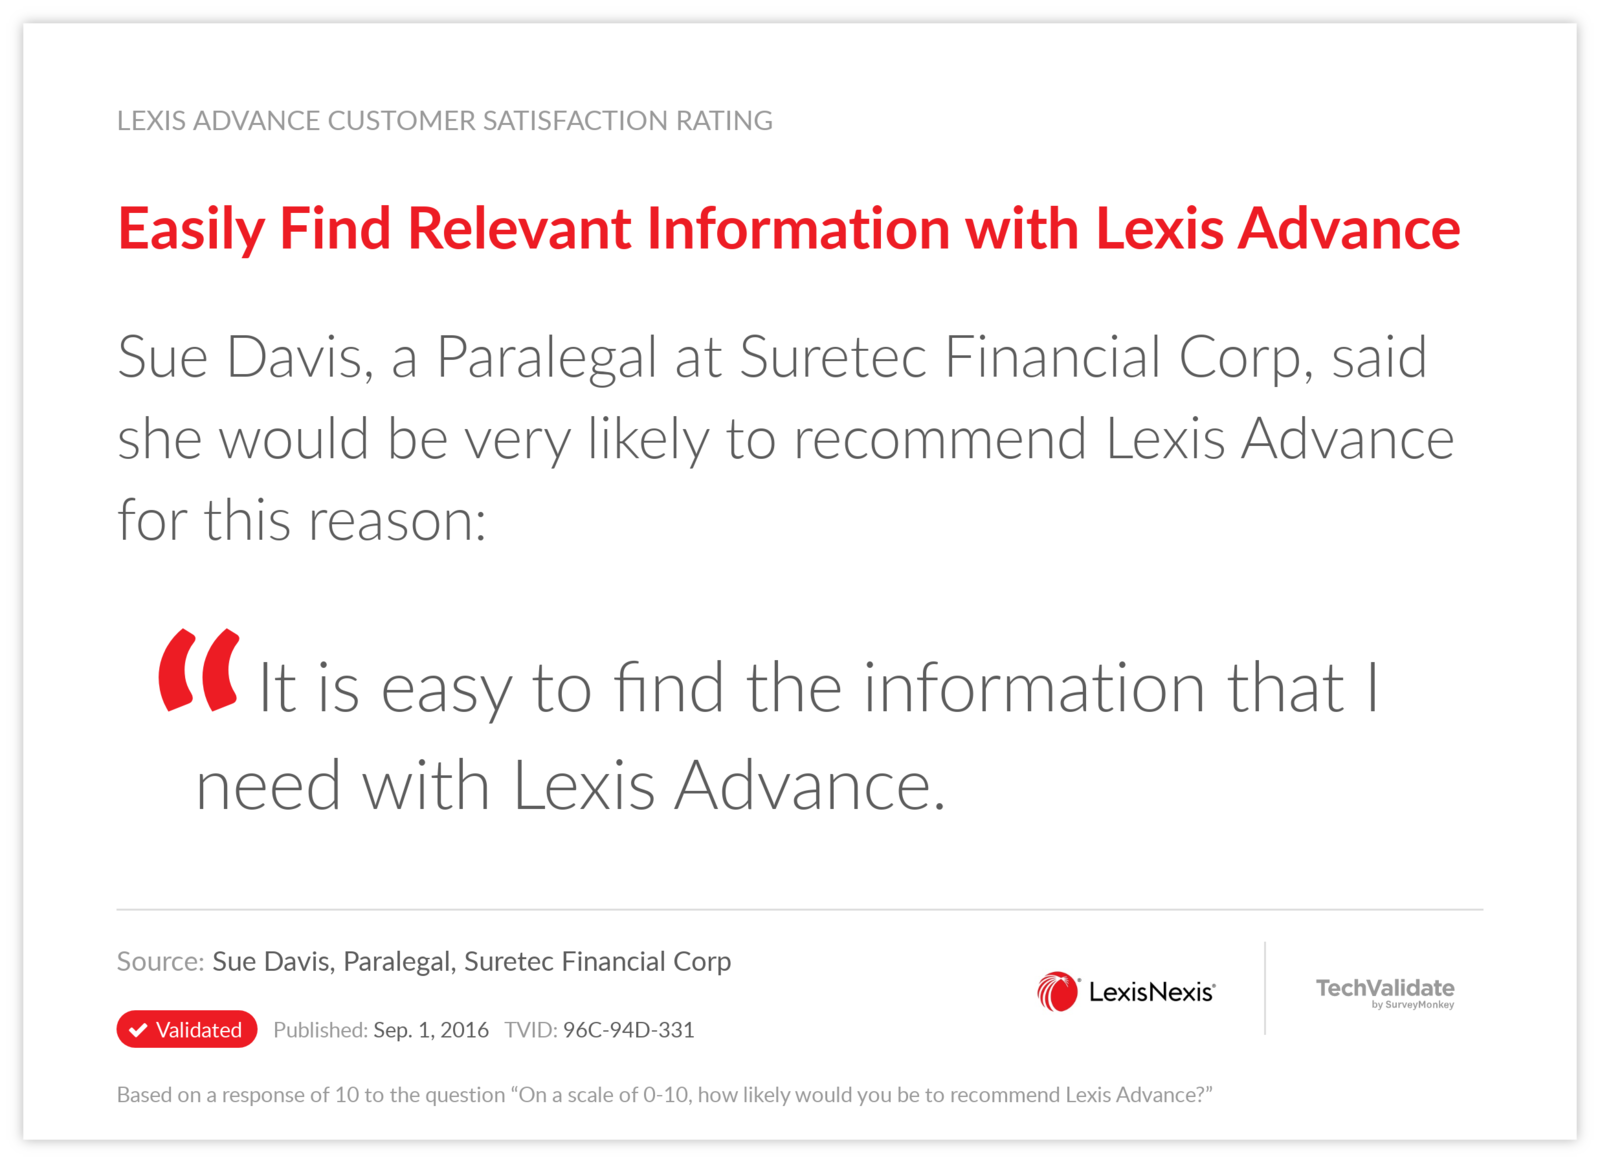 Easily Find Relevant Information with Lexis Advance